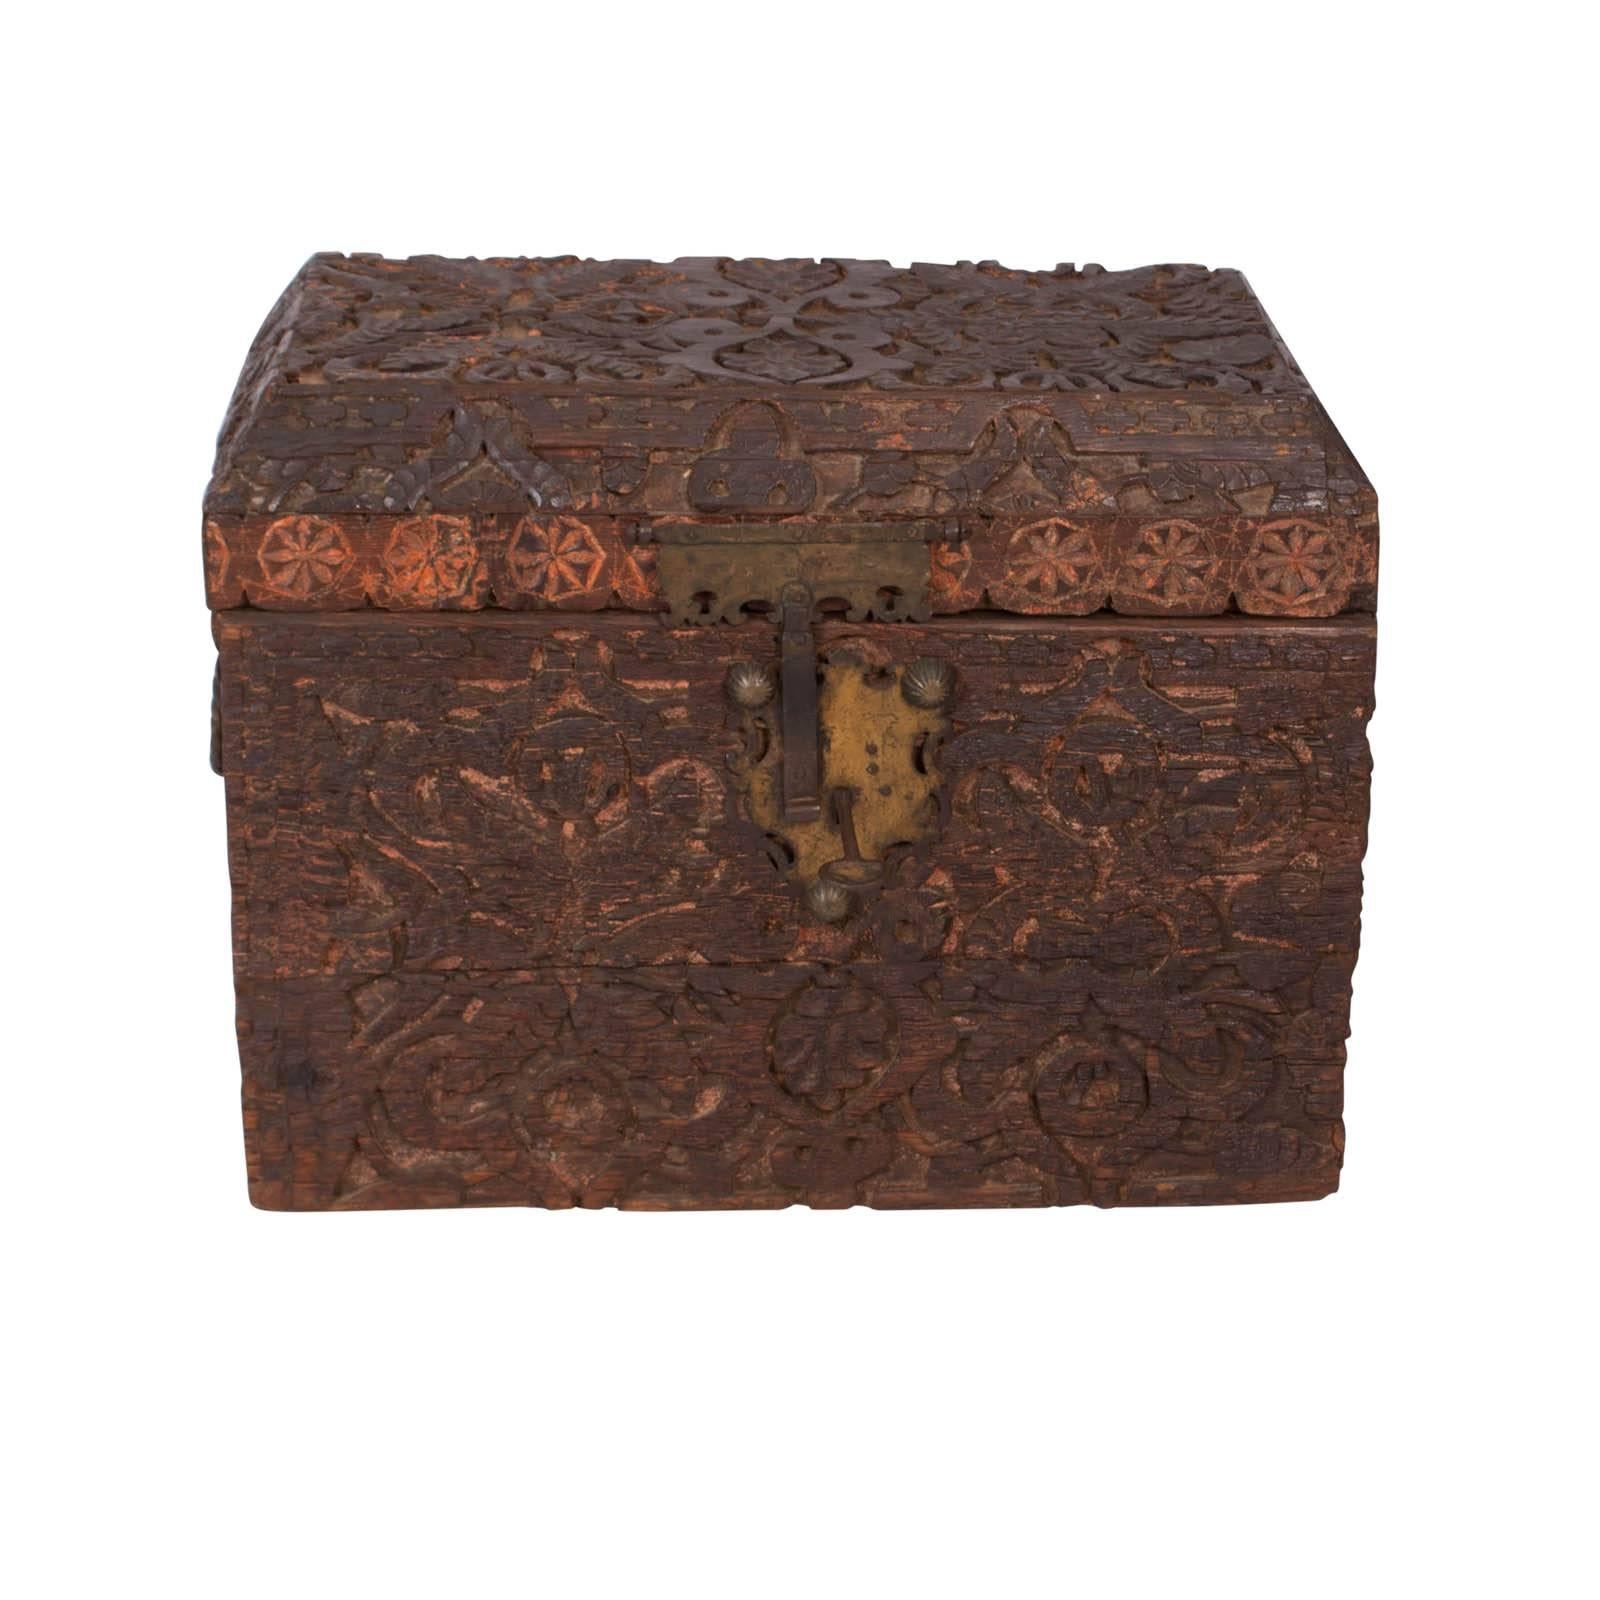 A rustic and handsome Indo-Persian trunk deeply carved with geometric motifs. Made in India or northern Africa, circa 1800 with great old hardware and a coffered top. An interesting rustic trunk that has substantial decorative appeal.